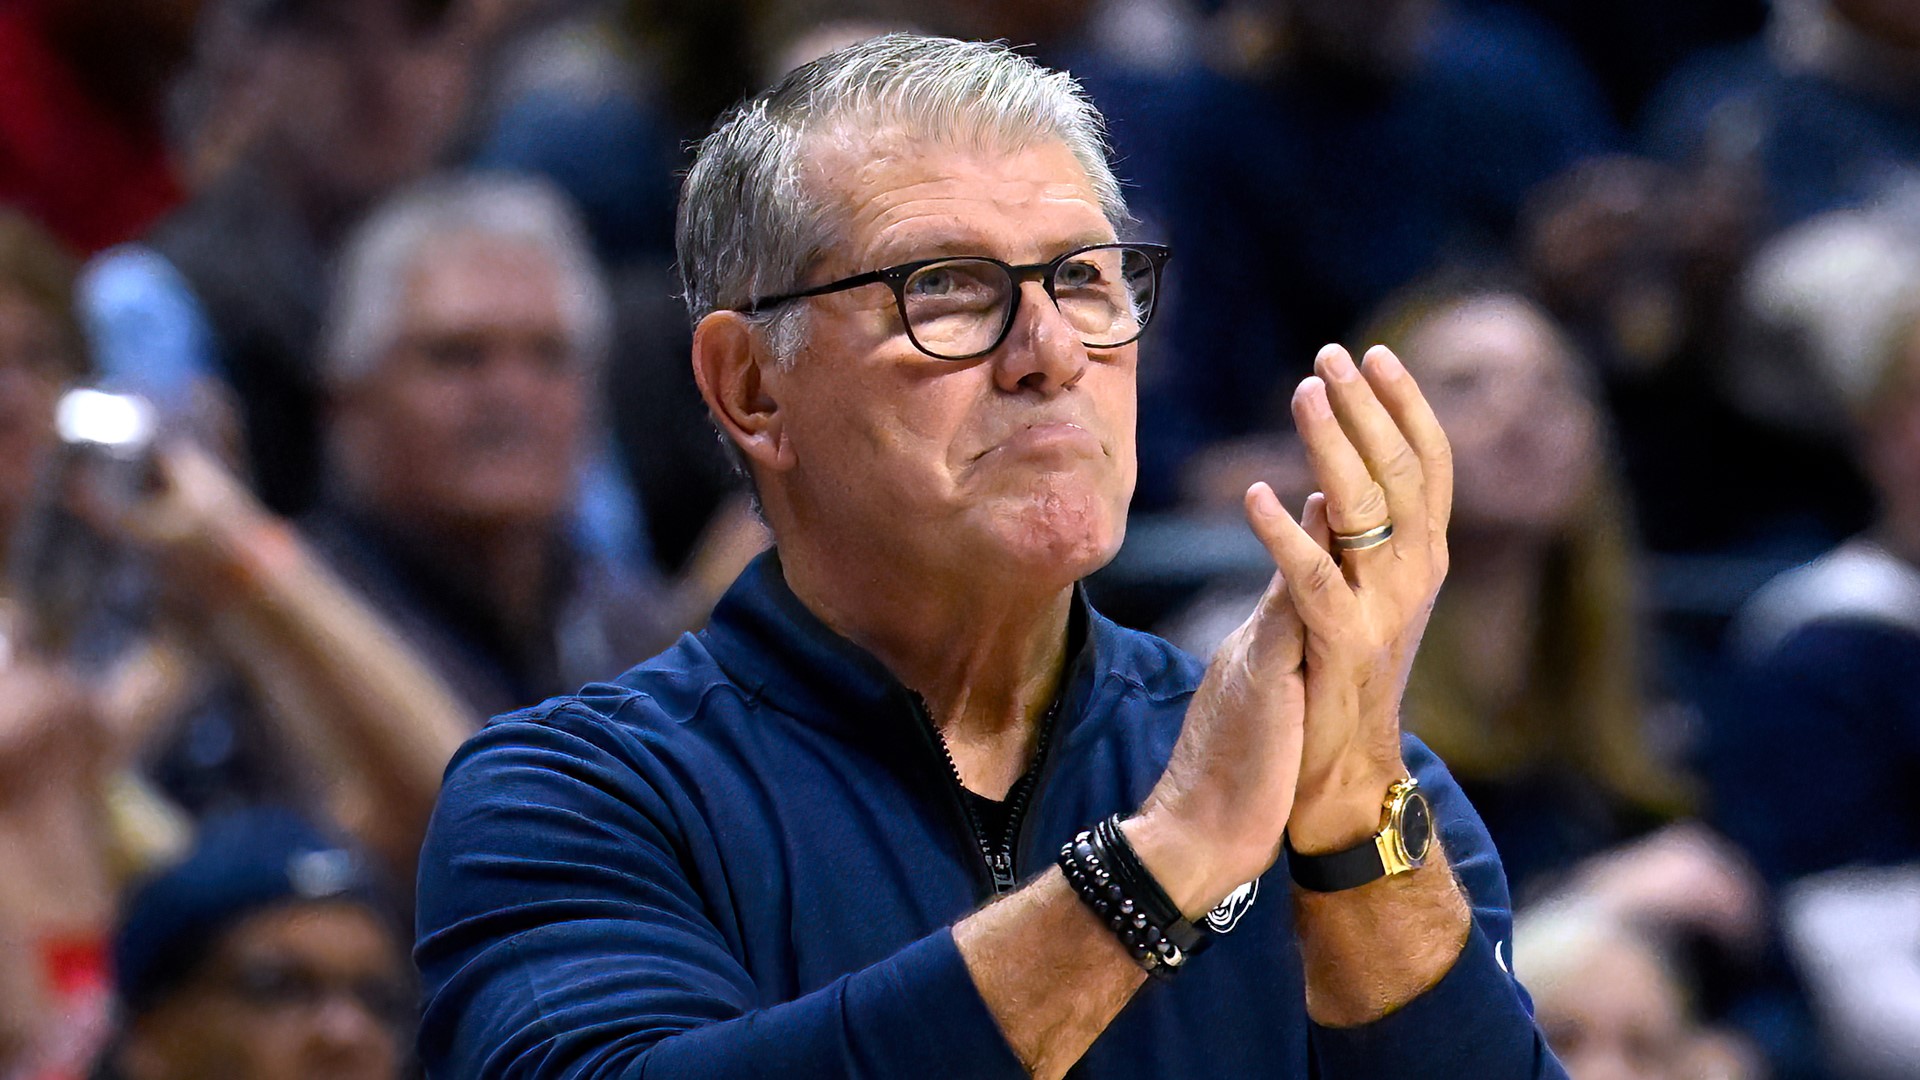 UConn women's basketball coach Geno Auriemma is one win away from reaching 1,200 wins in his career.